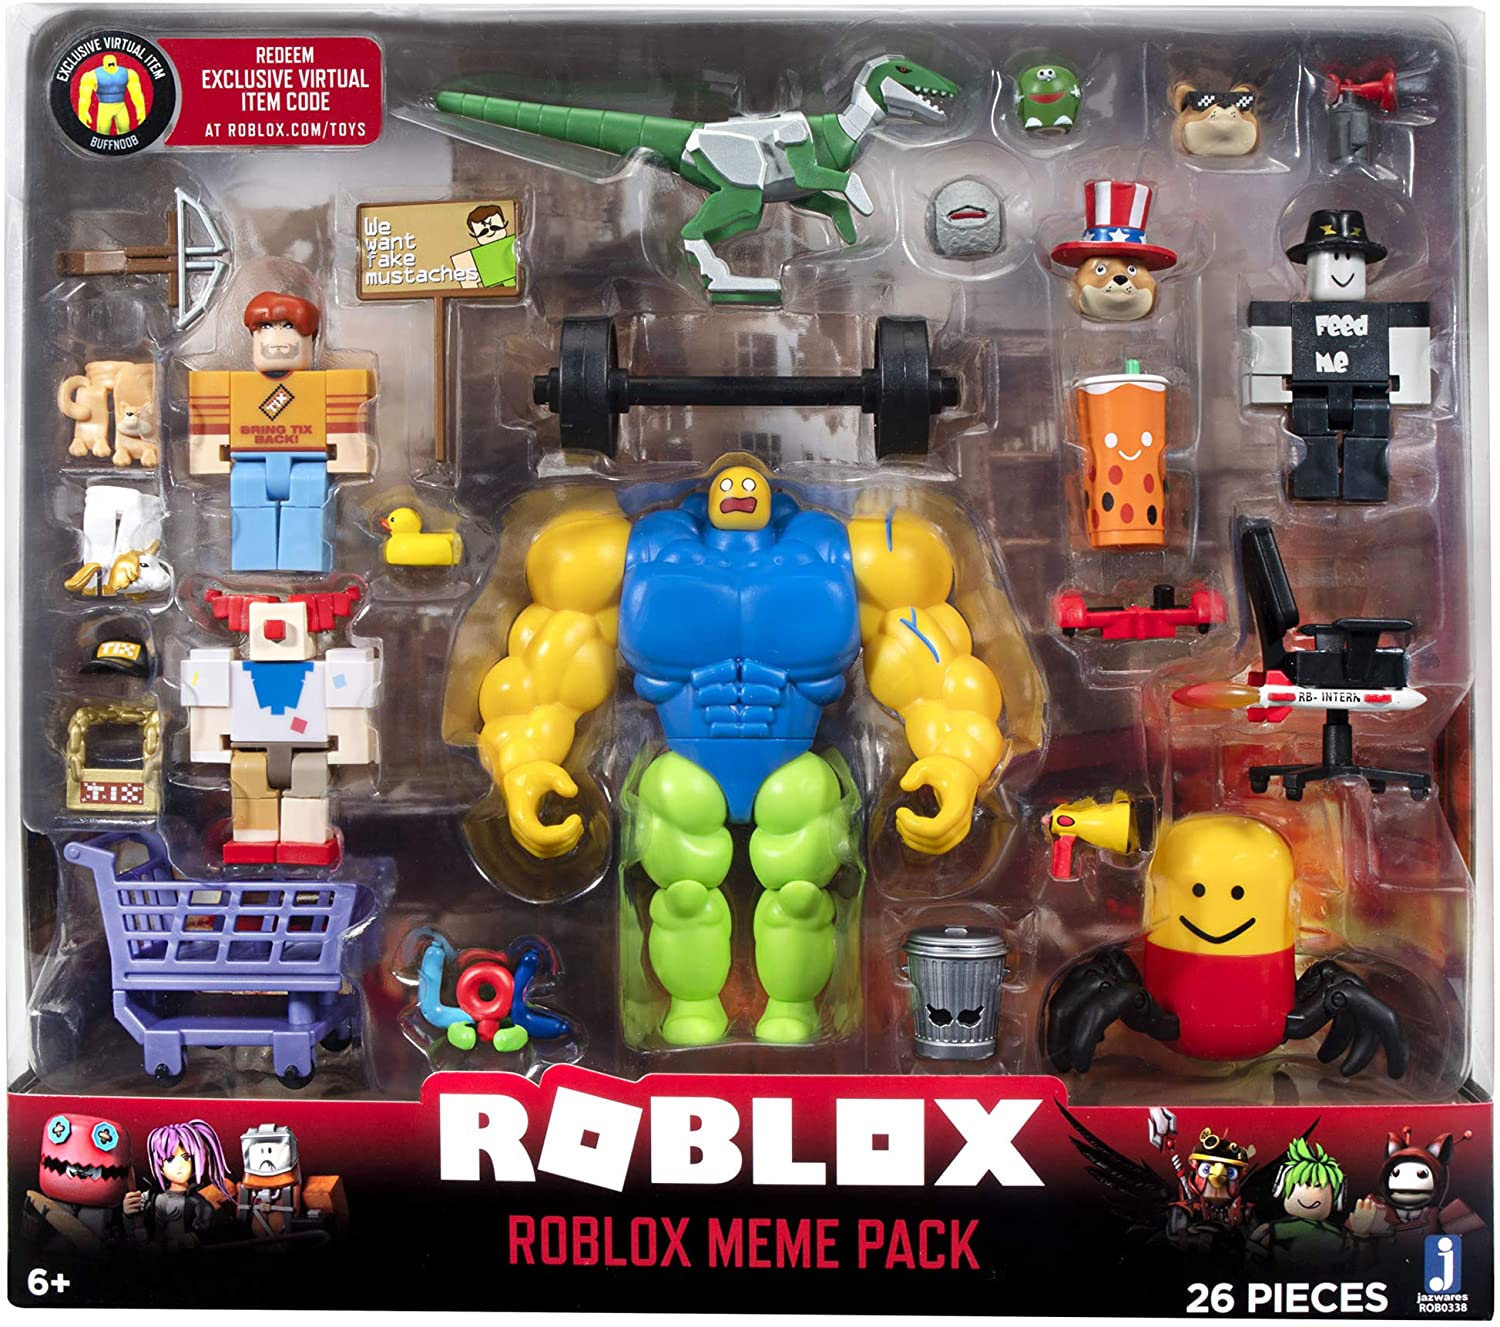 Thunder1222 V Twitter After Careful Deliberation I Have Decided To Post This Go Buy Mega Noob In Your Local Target Or On Amazon - jazwares в твиттере redeem roblox exclusive virtual items